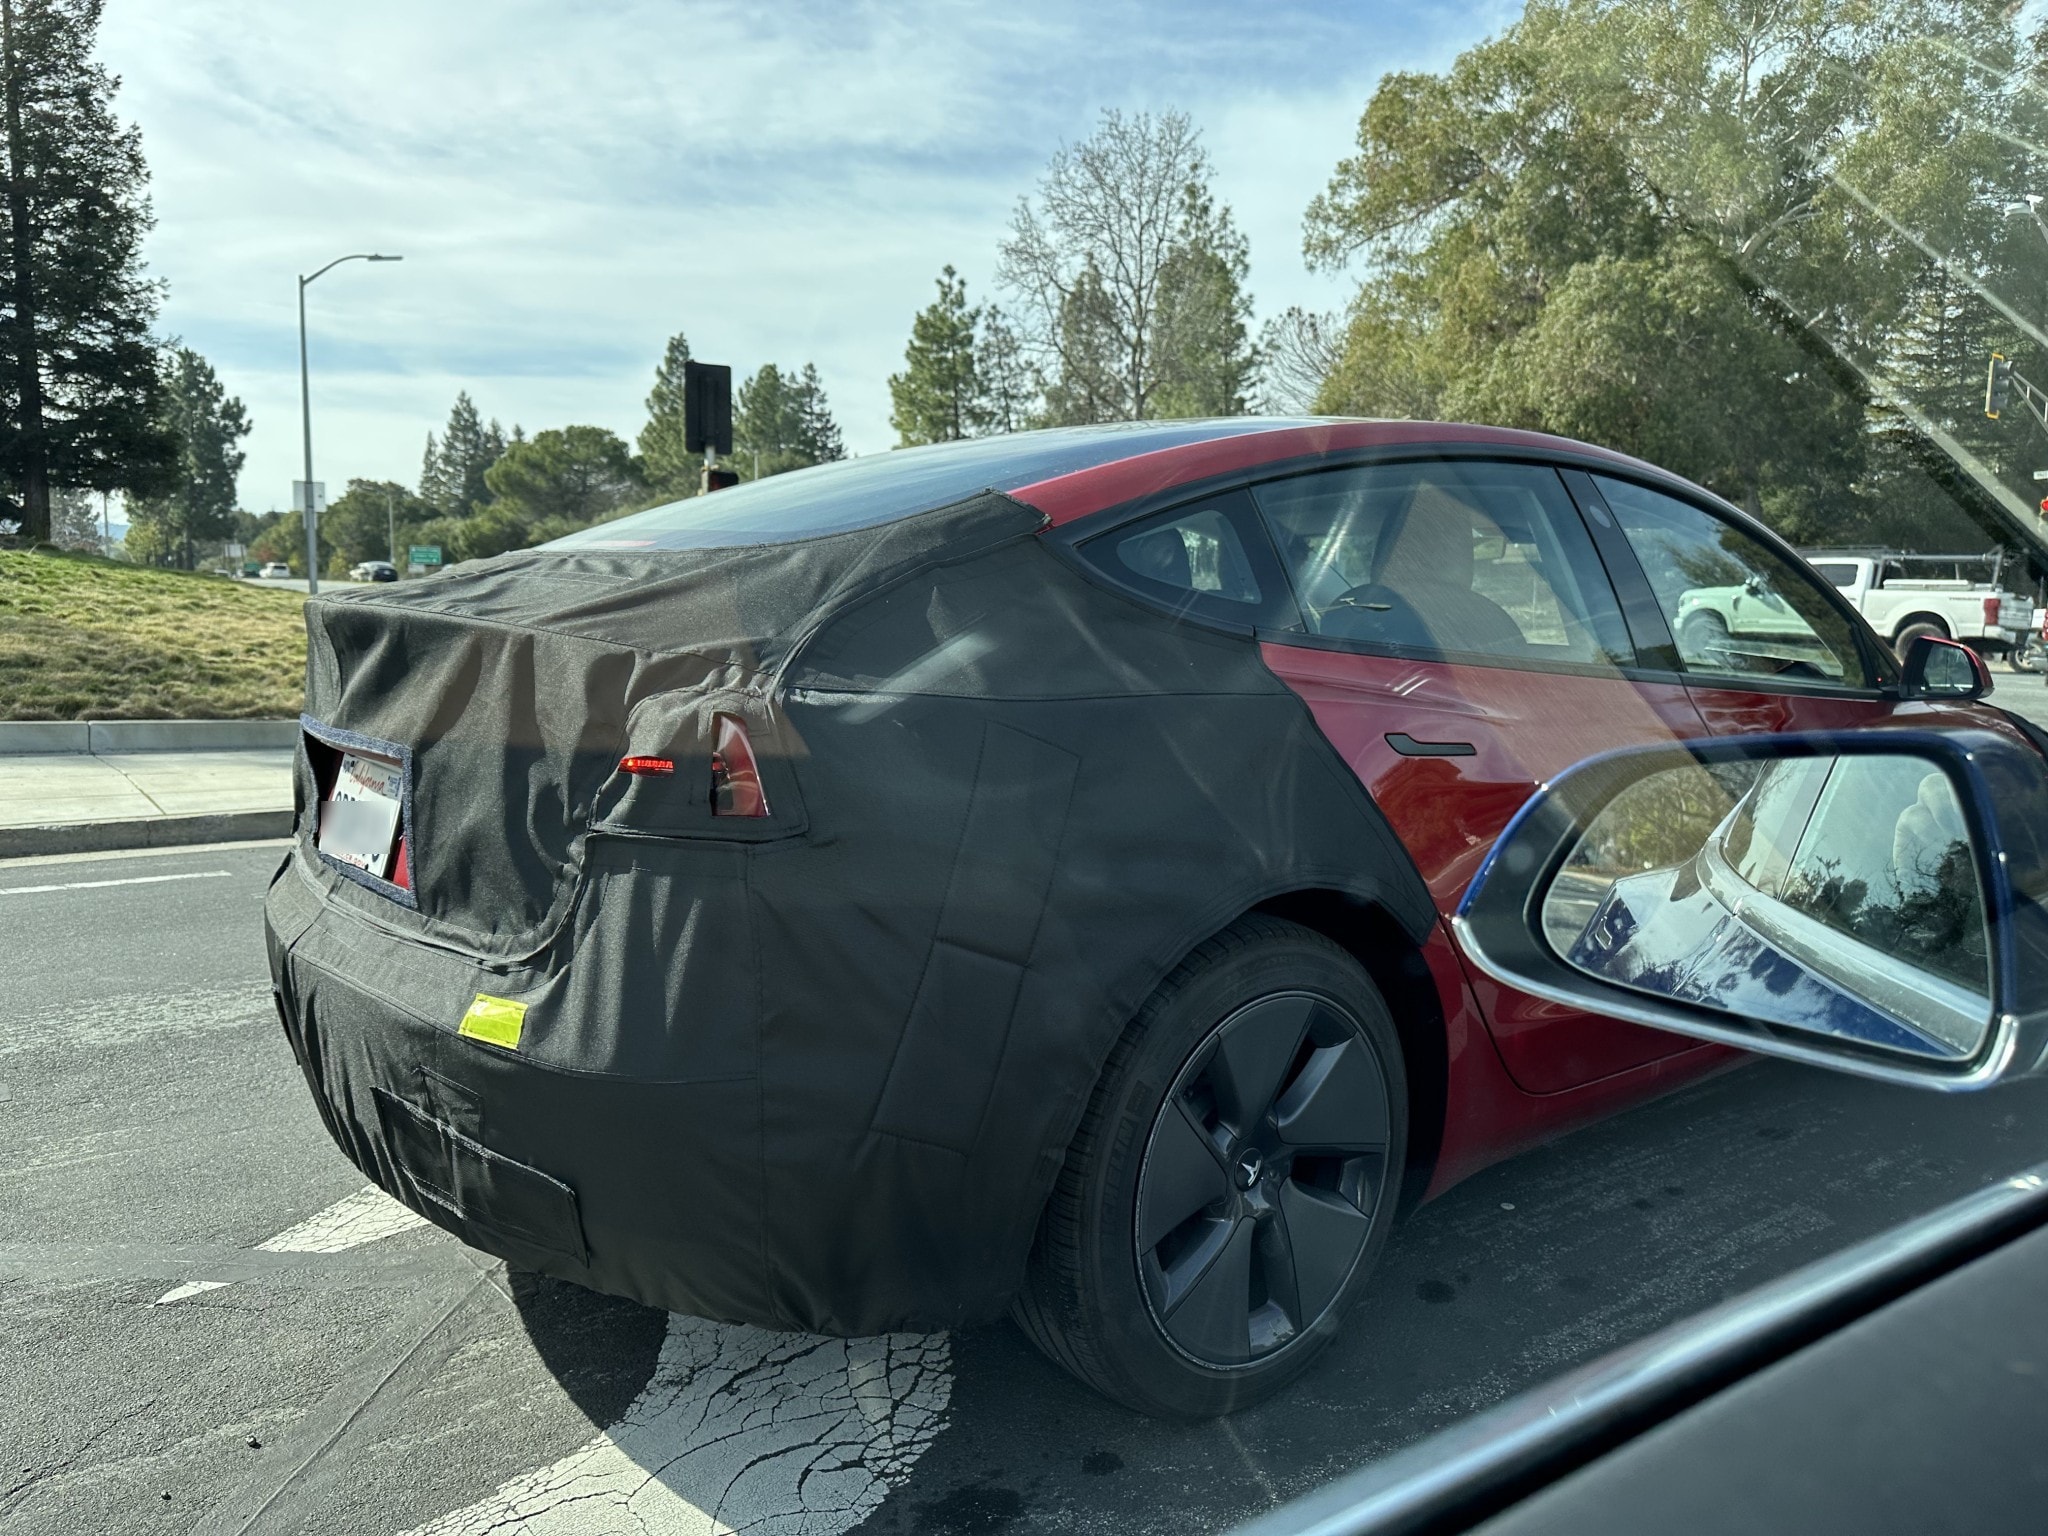 New Tesla Model 3 "Project Highland" Prototype Spotted in the Wild